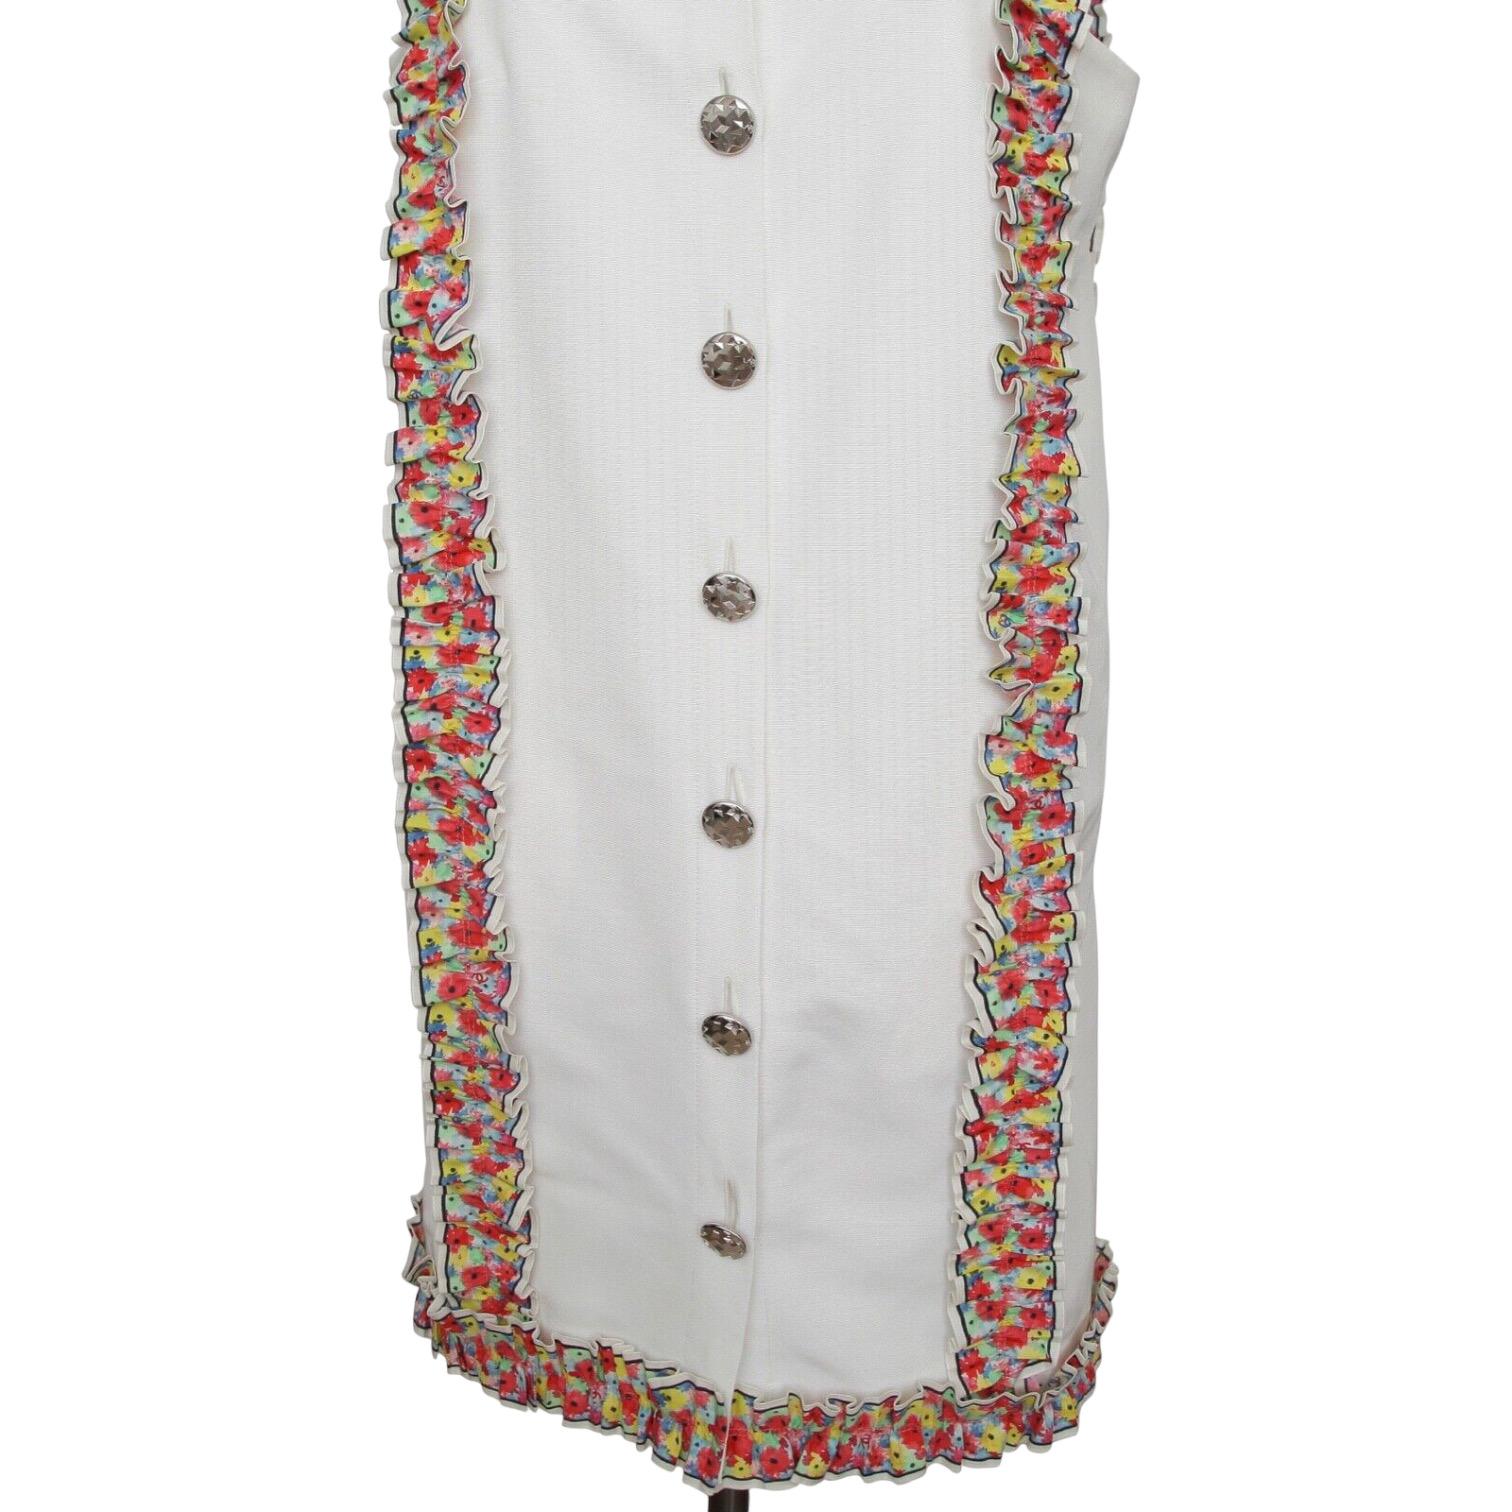 CHANEL Dress White Sleeveless Multicolor Floral Silver HW Collar 42 RUNWAY 2016 2